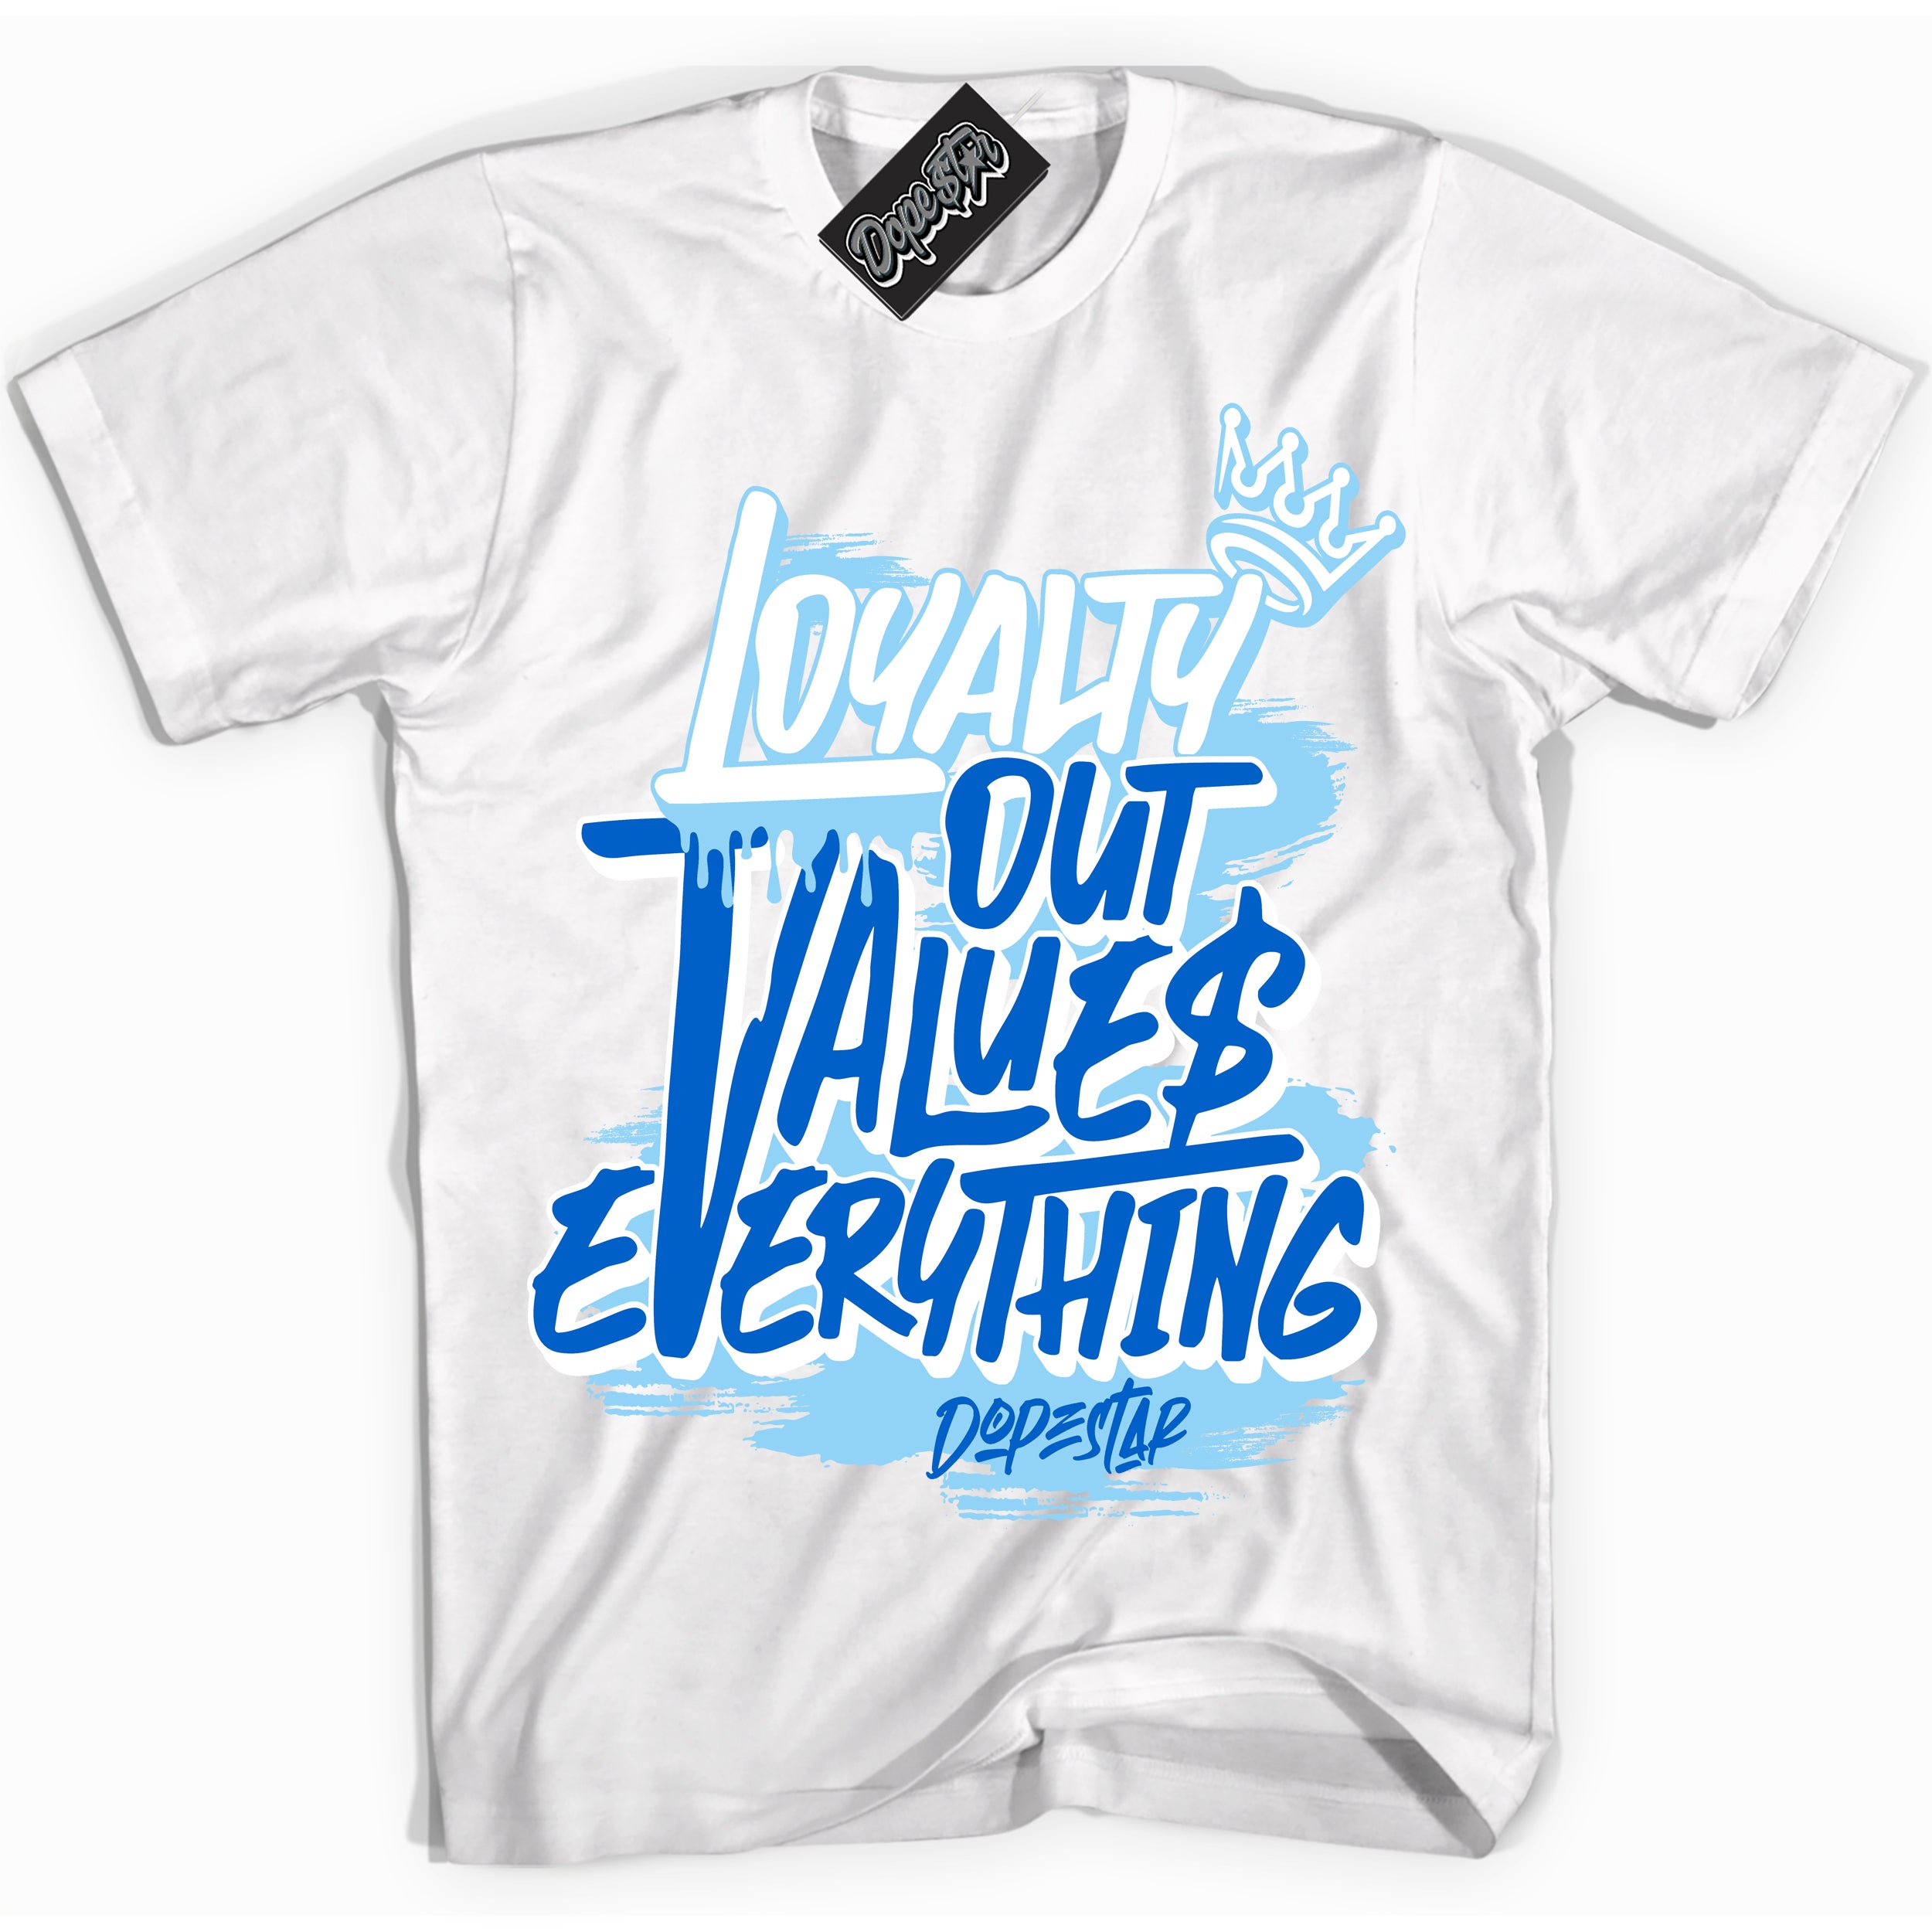 Cool White Shirt with “ Loyalty Out Values Everything” design that perfectly matches Argon Sneakers.